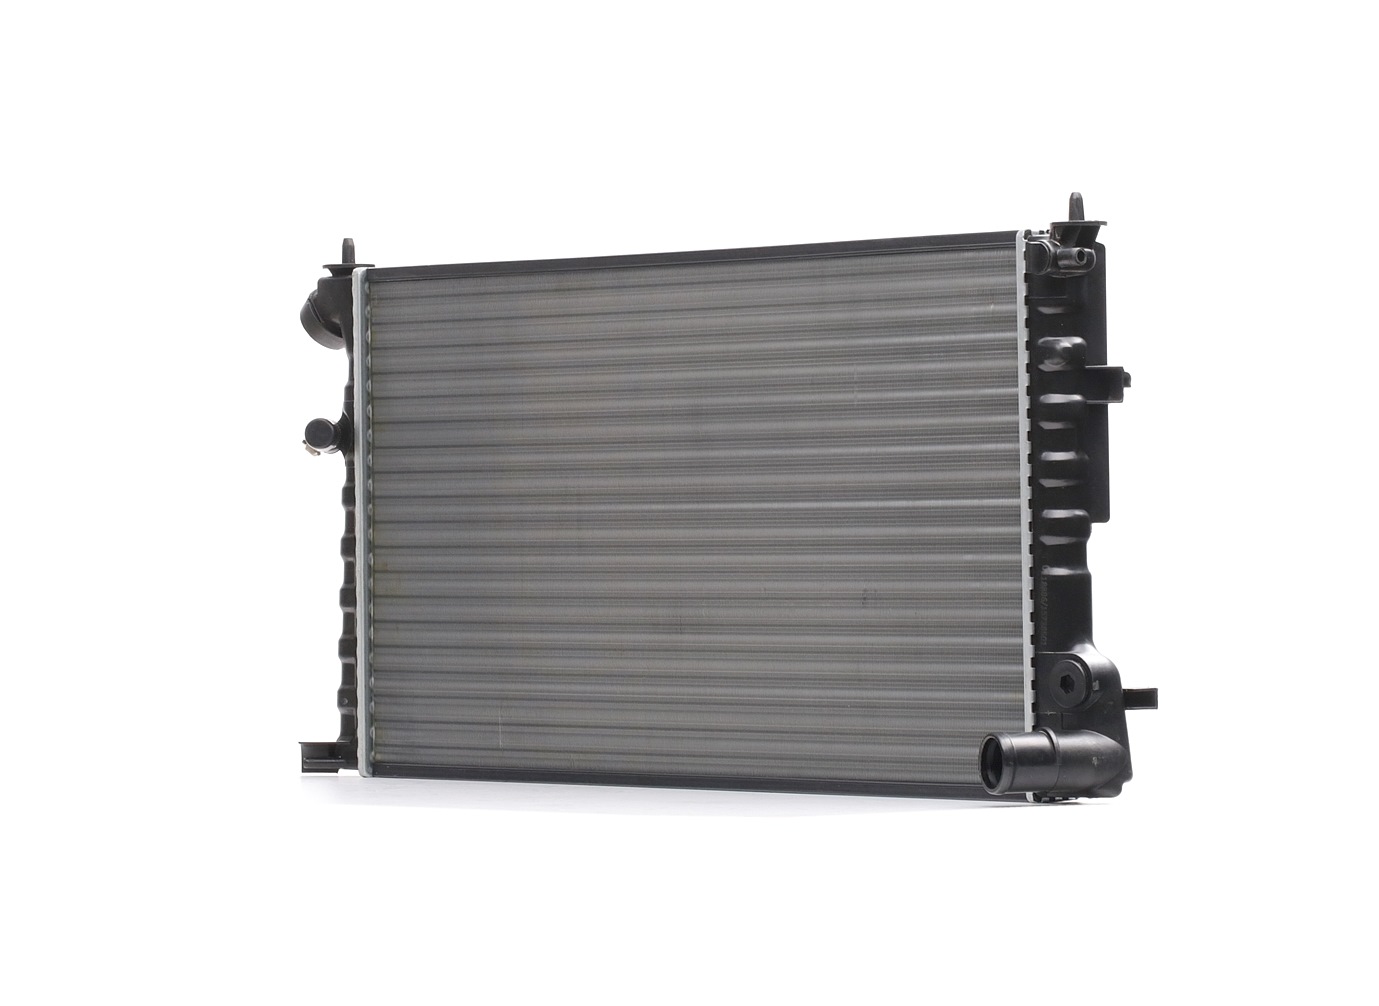 STARK SKRD-0121065 Engine radiator Aluminium, Plastic, for vehicles with/without air conditioning, Manual Transmission